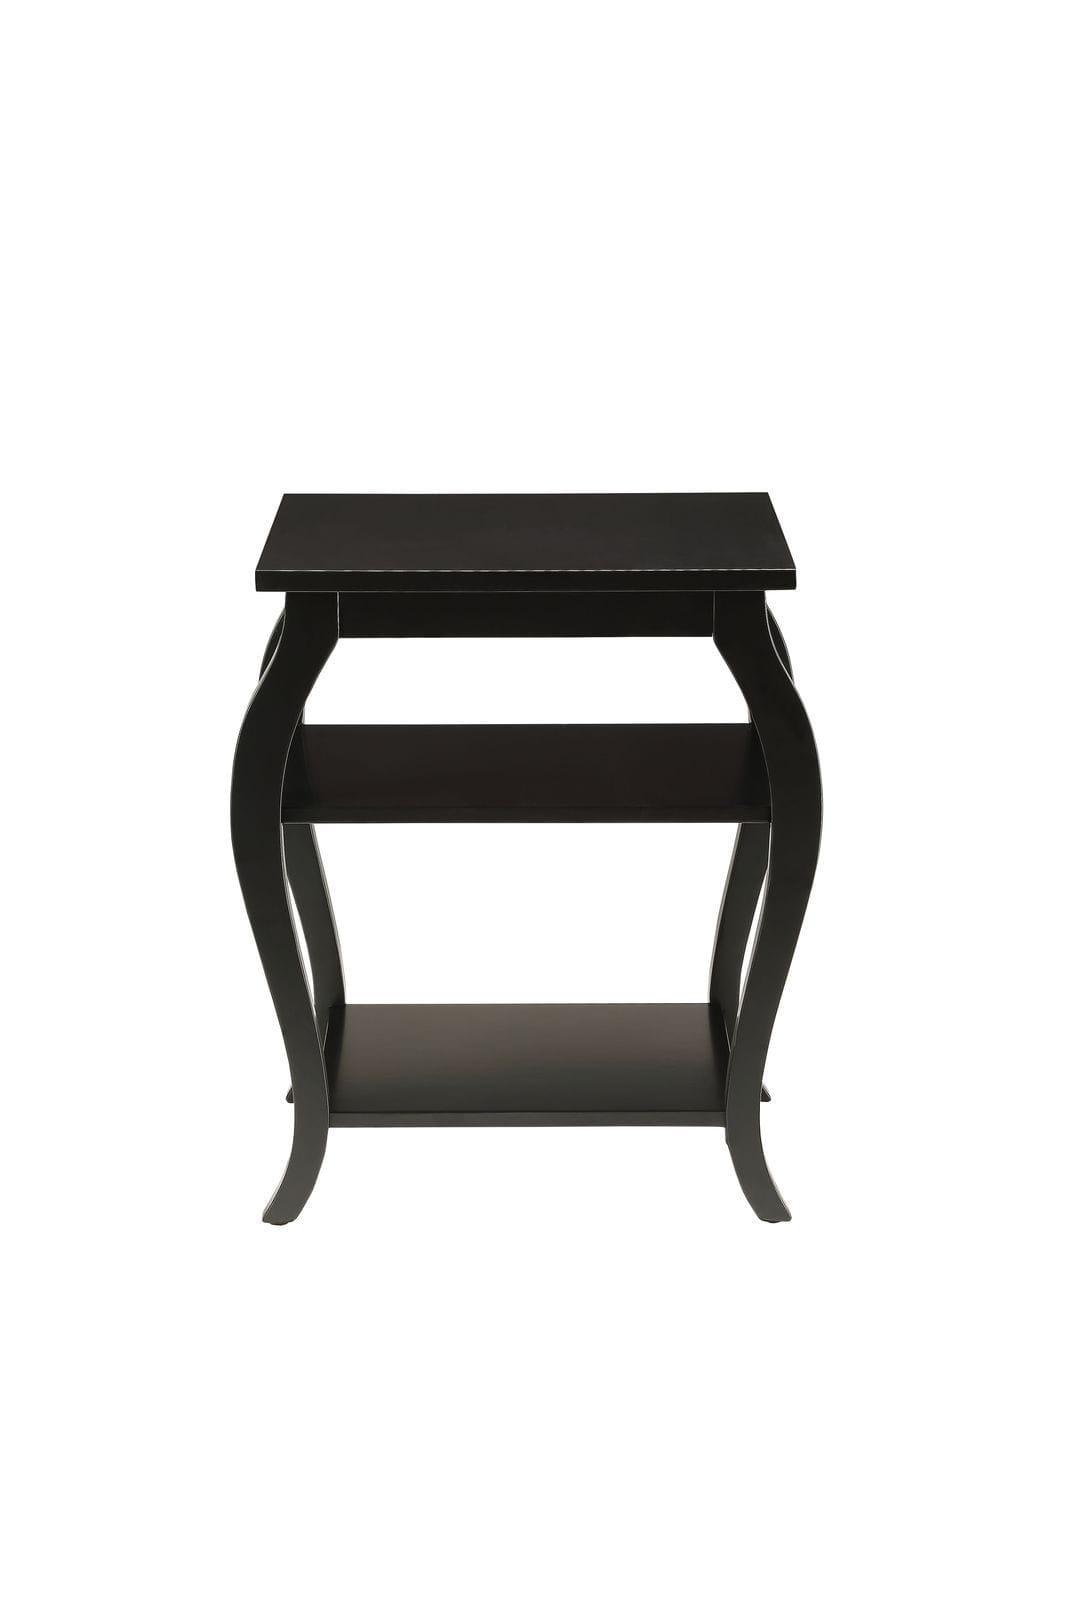 Shop ACME Becci End Table in Black 82826 Mademoiselle Home Decor